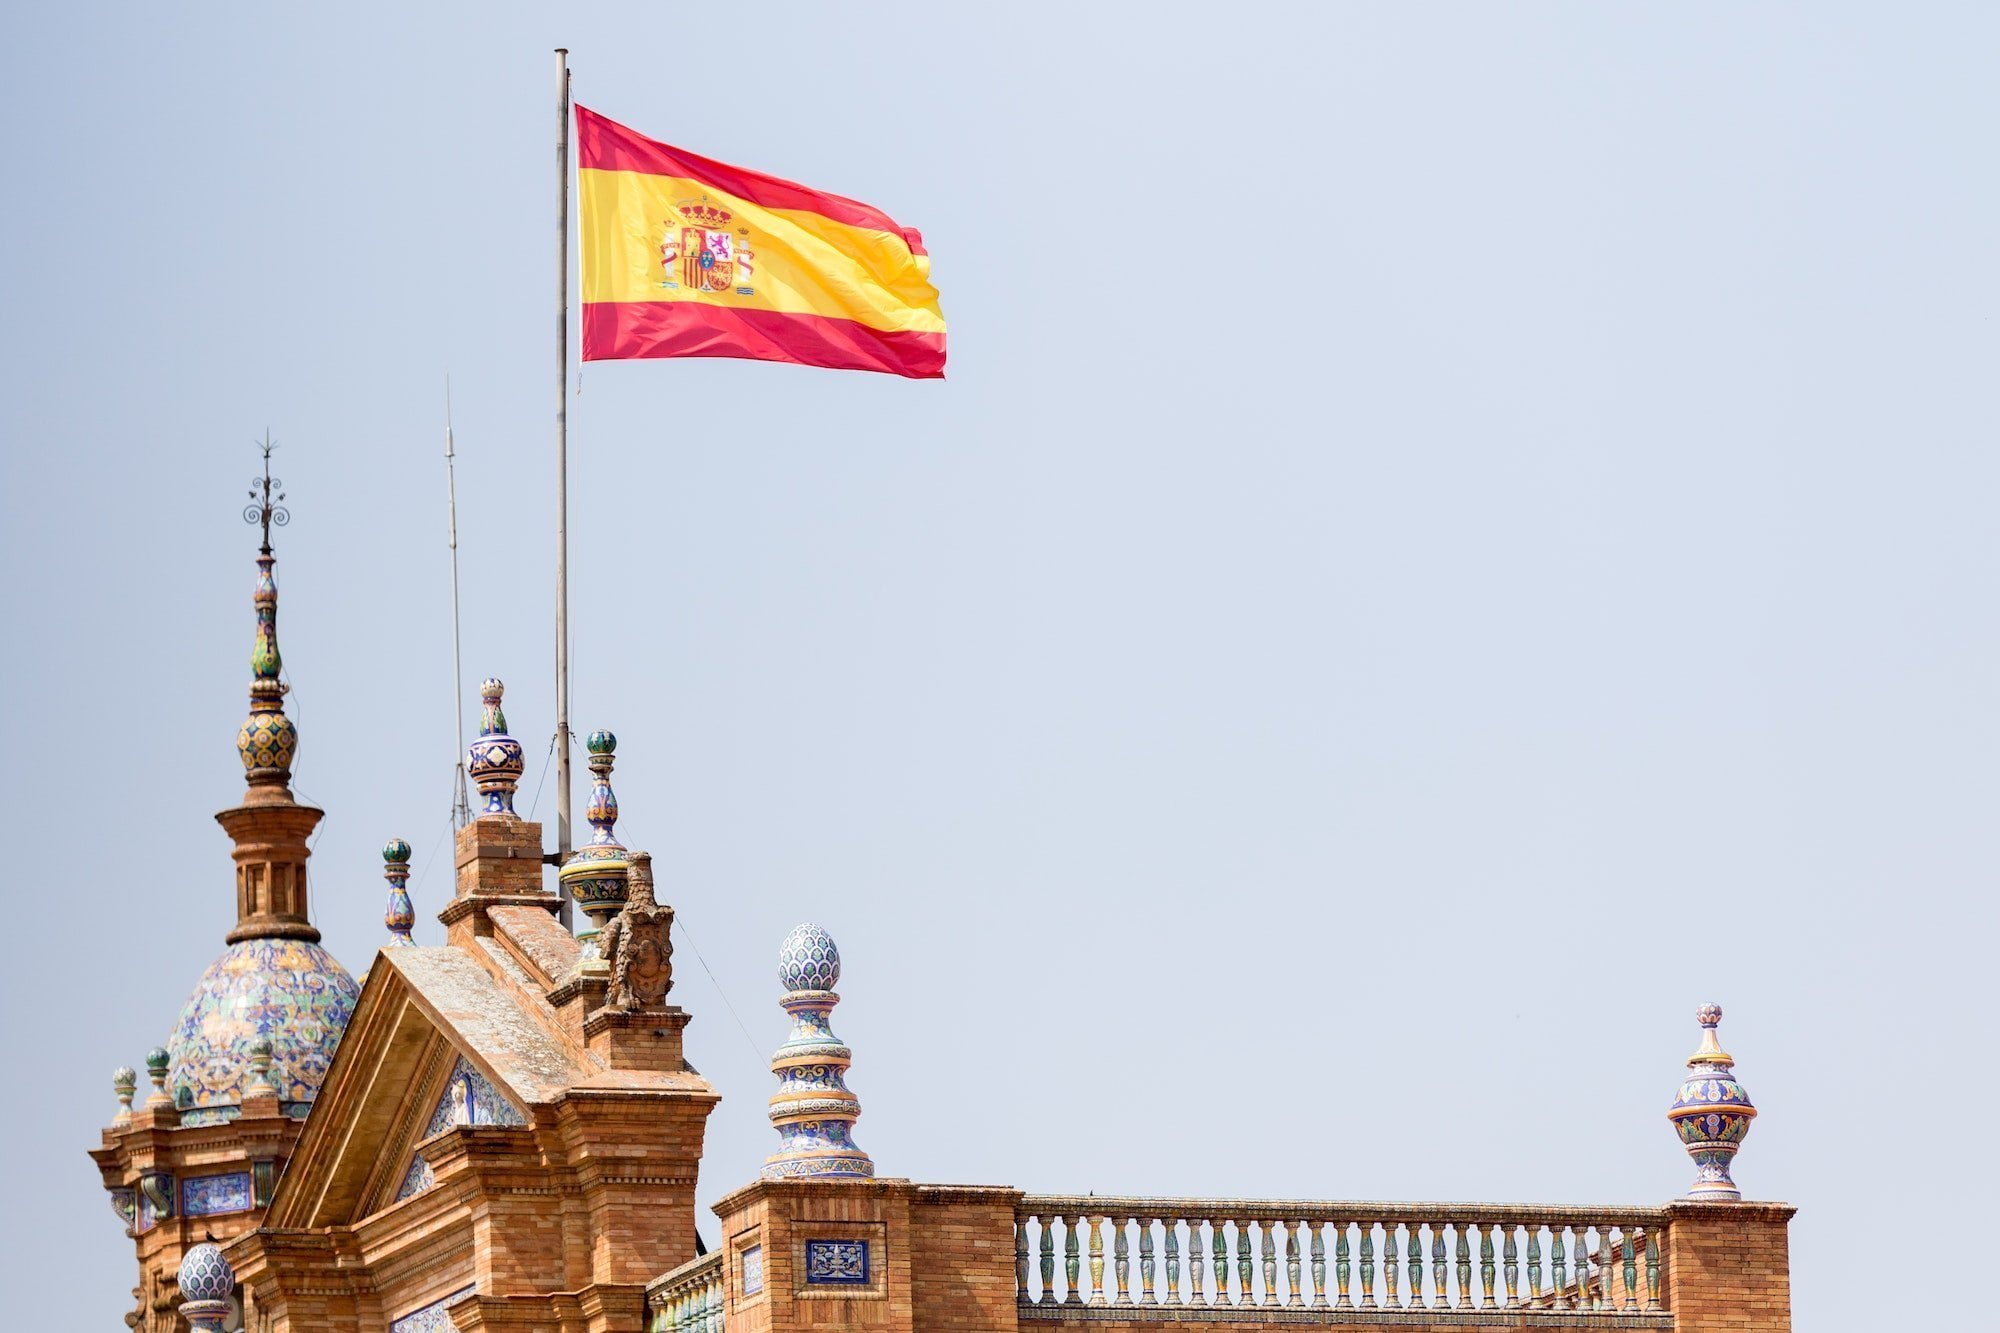 The flag of Spain flies over the building at the Plaza de España in Seville